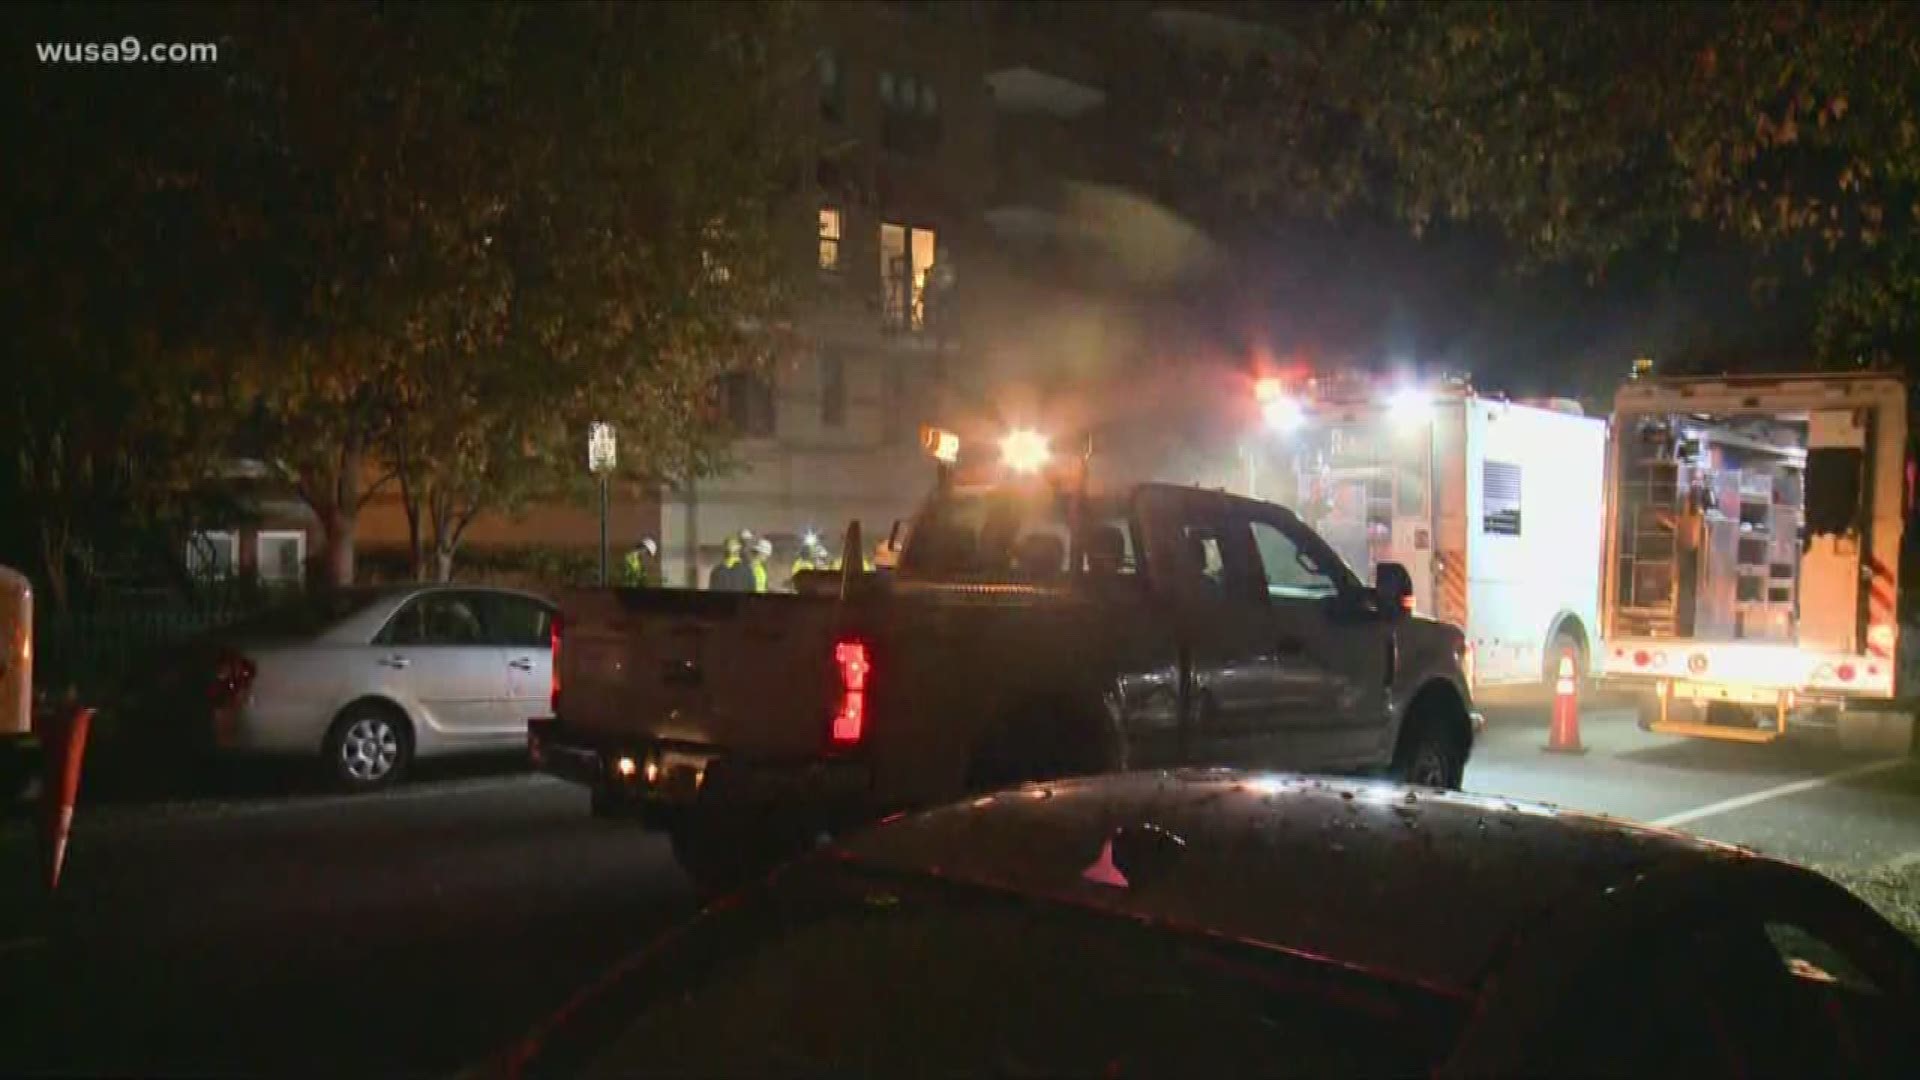 D.C. Fire crews responded to the scene of two underground explosions that shut down the area near Dupont Circle.